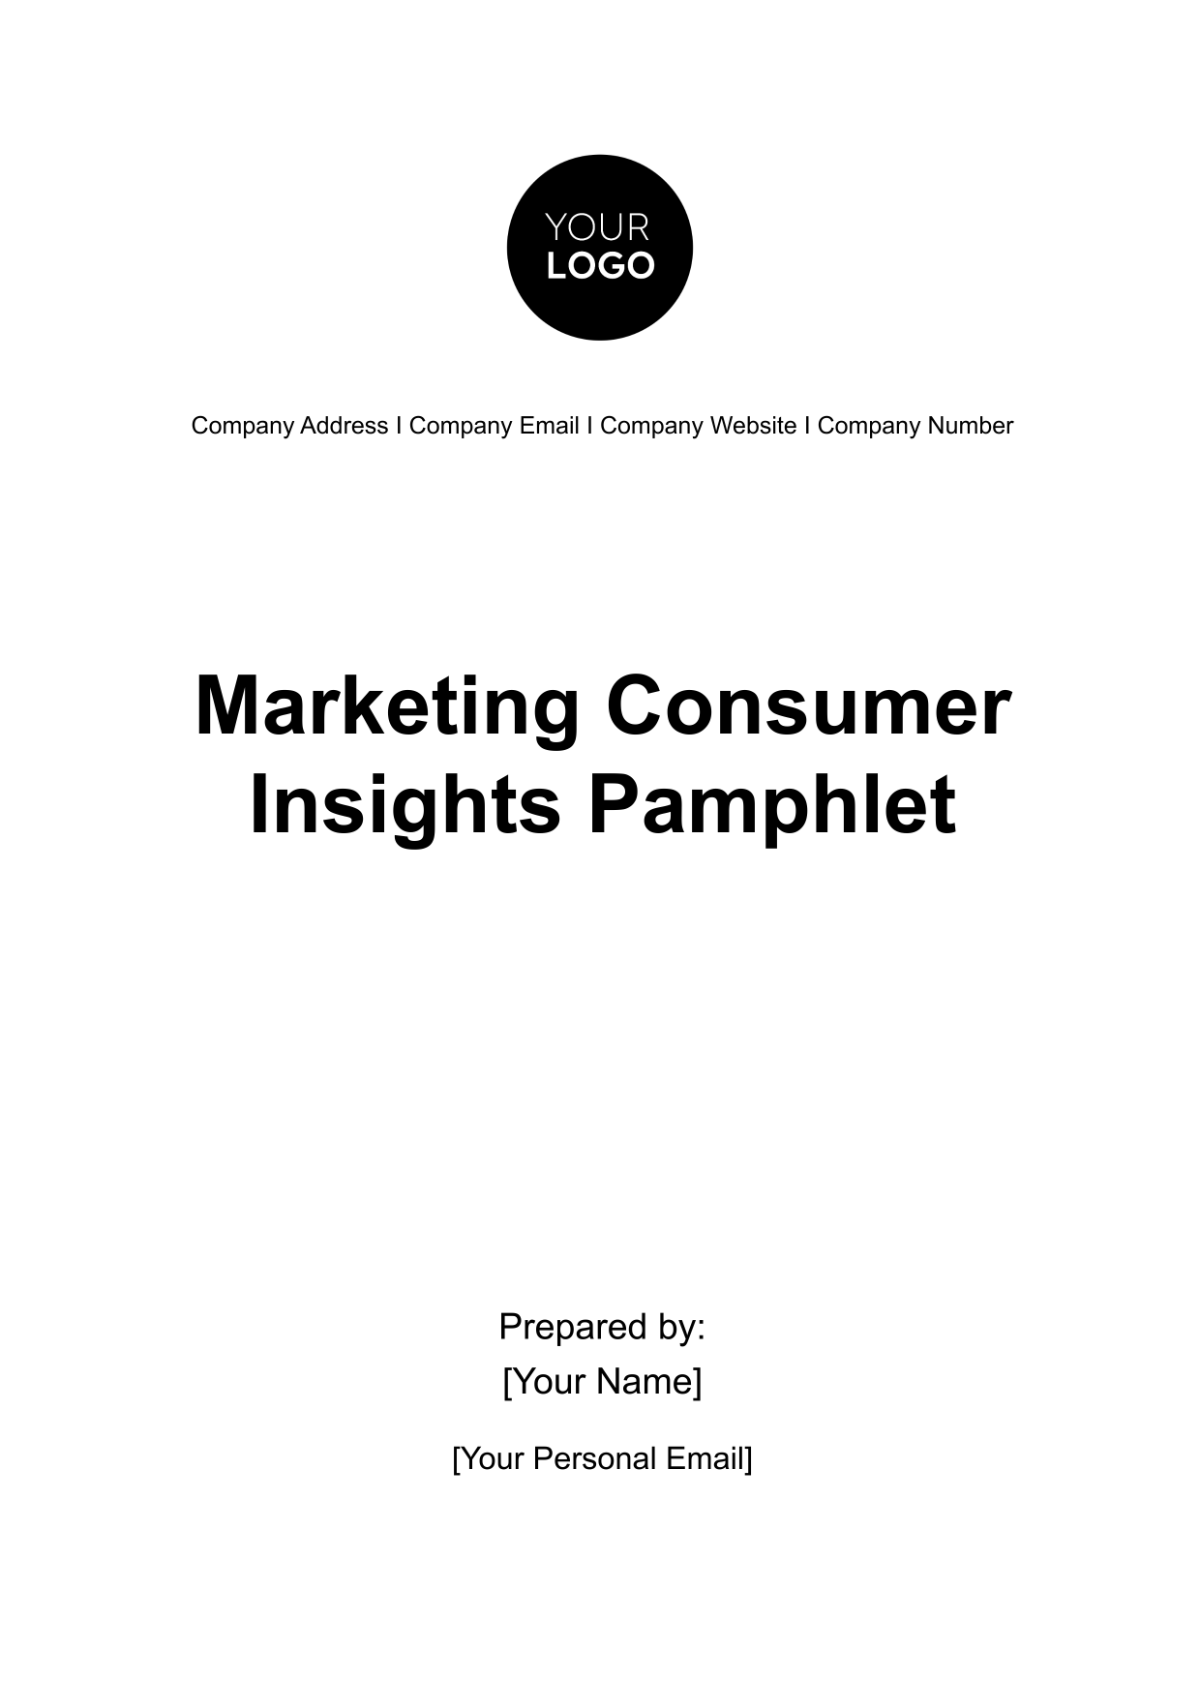 Free Marketing Consumer Insights Pamphlet Template